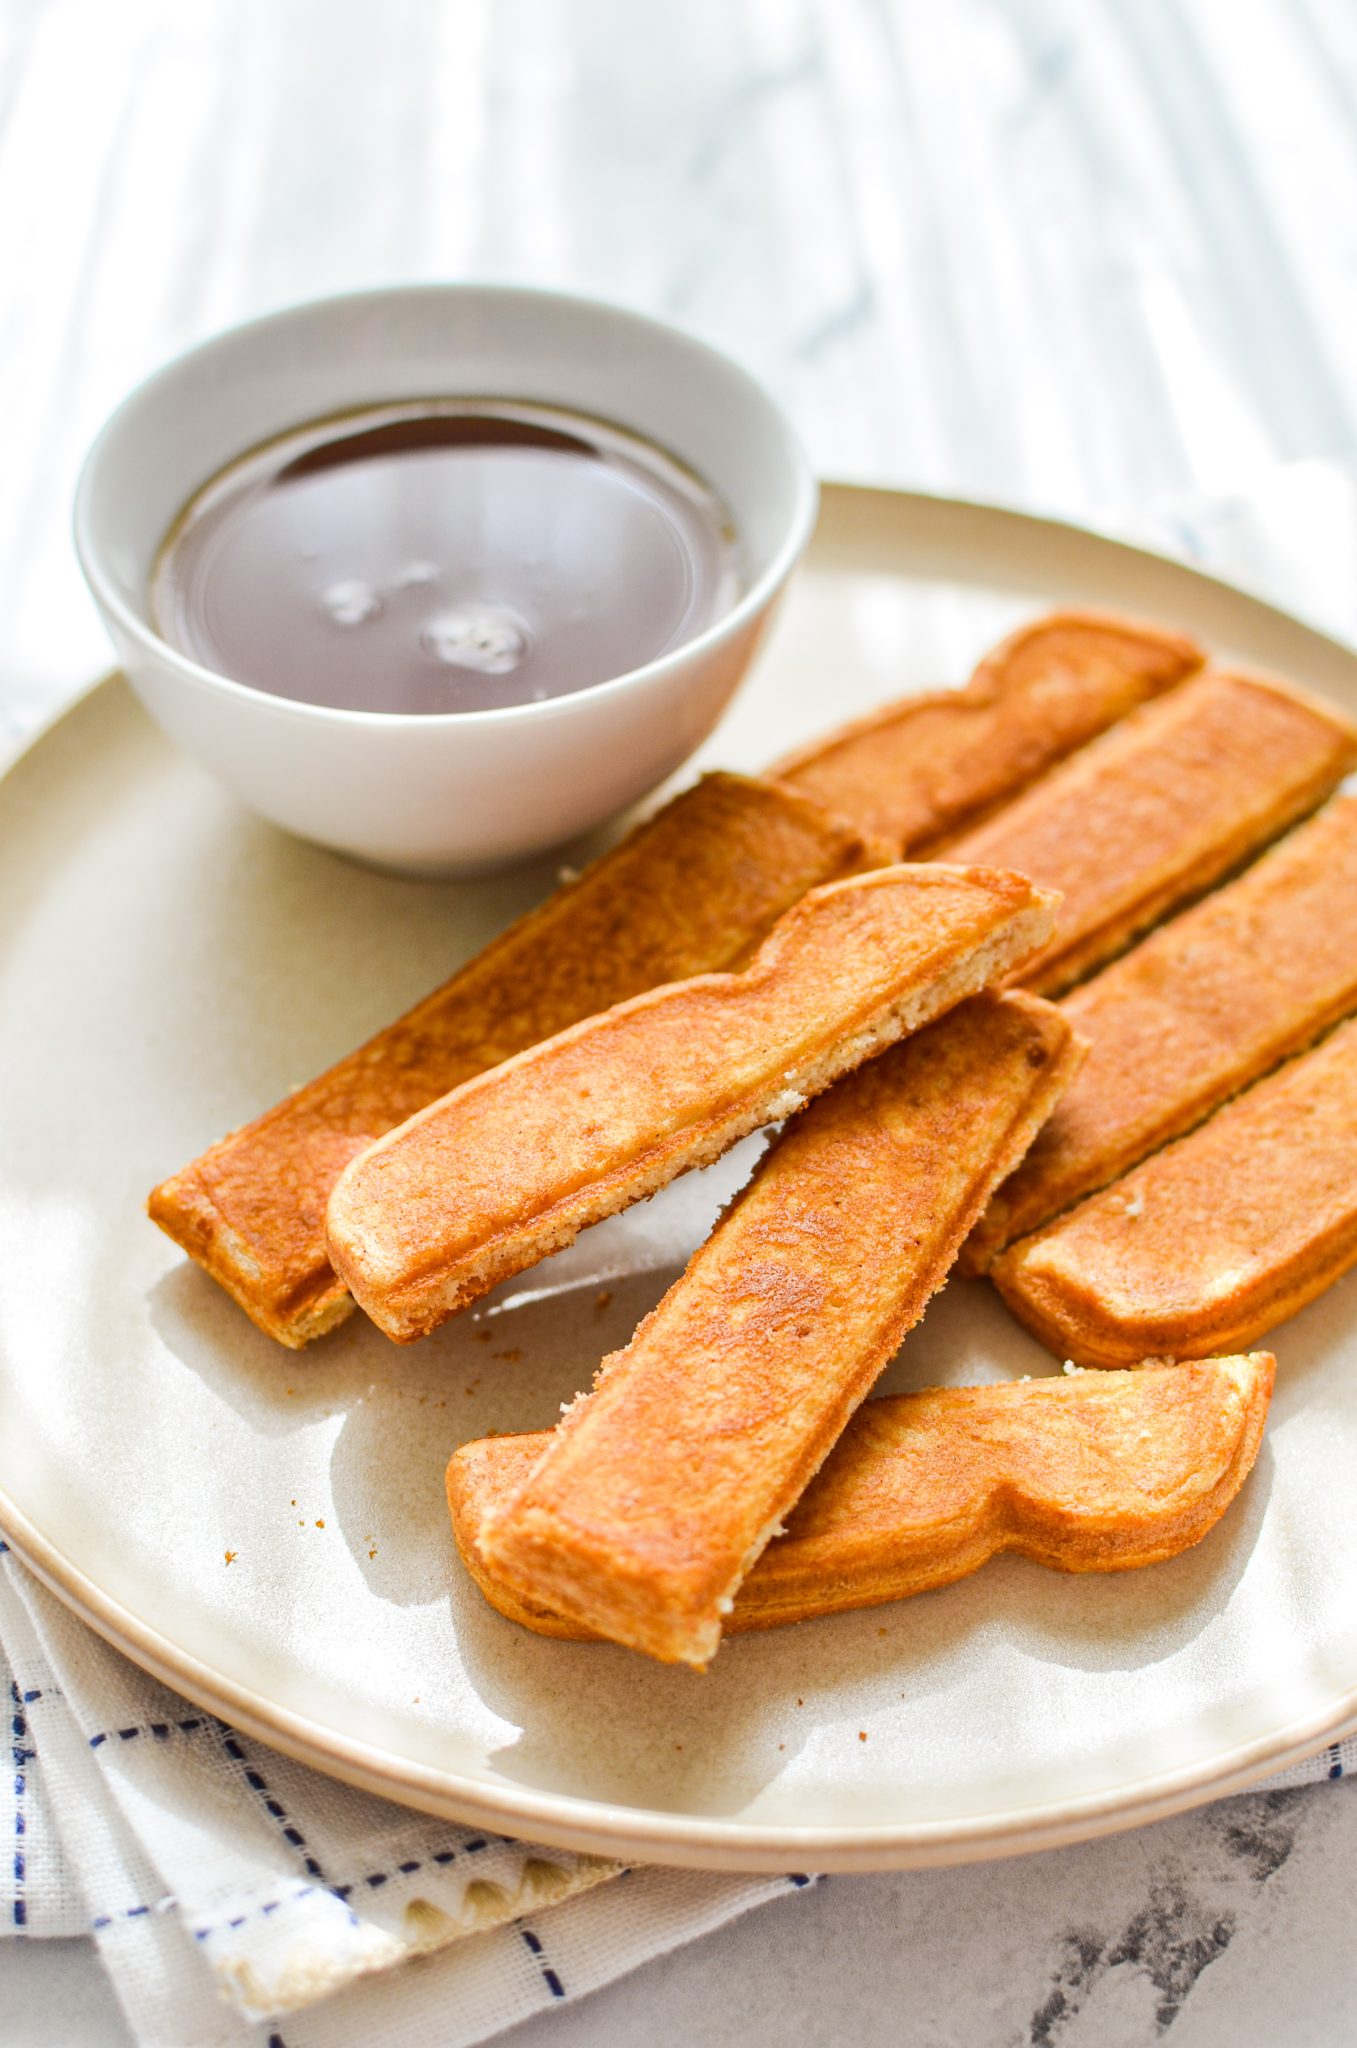 A plate of toast sticks with a bowl of maple syrup on the side.